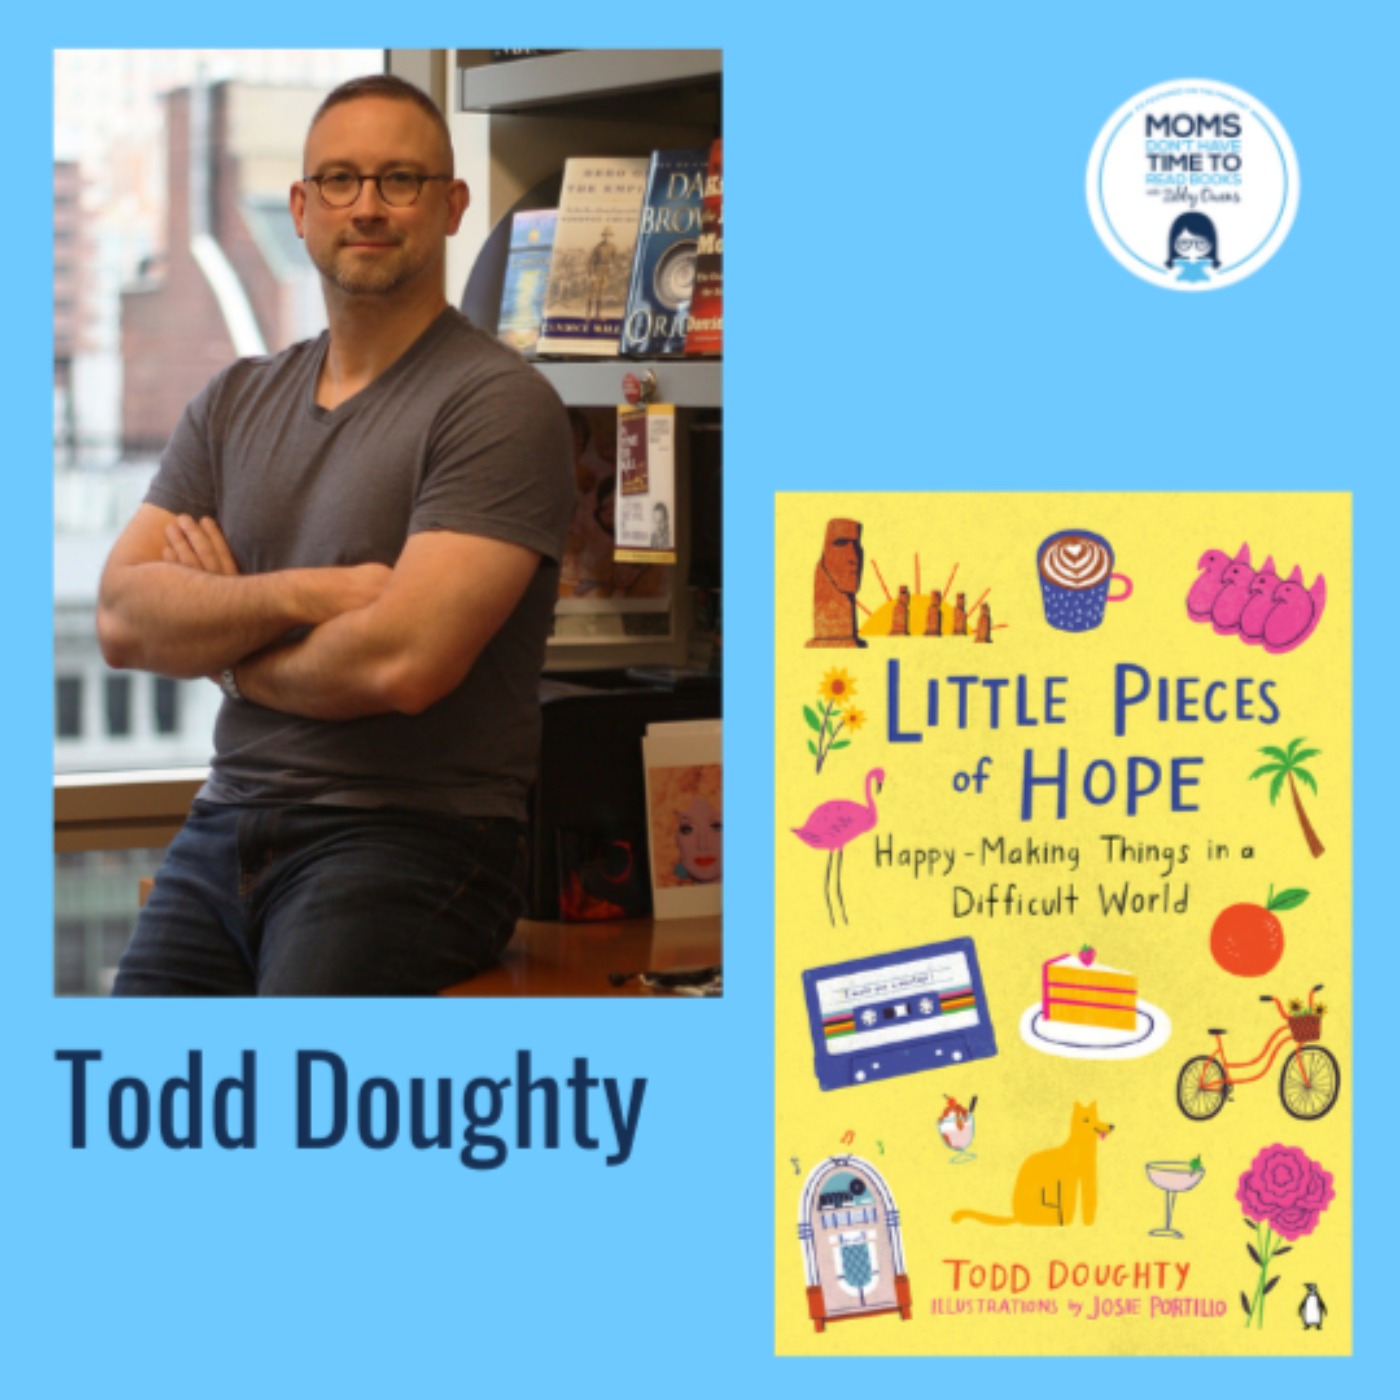 Todd Doughty, LITTLE PIECES OF HOPE: Happy-Making Things in a Difficult World